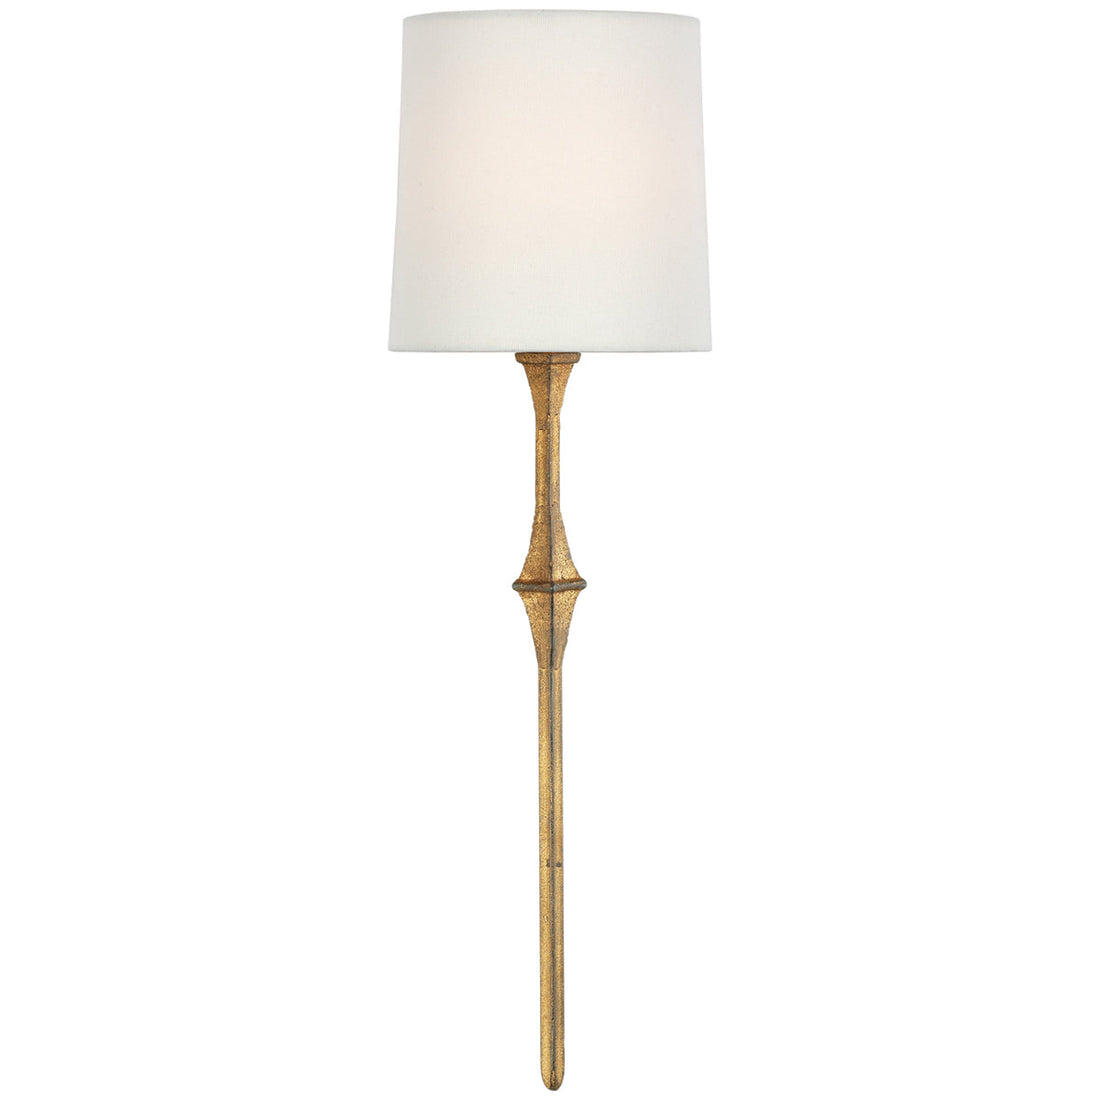 Visual Comfort Dauphine Sconce with Linen Shade